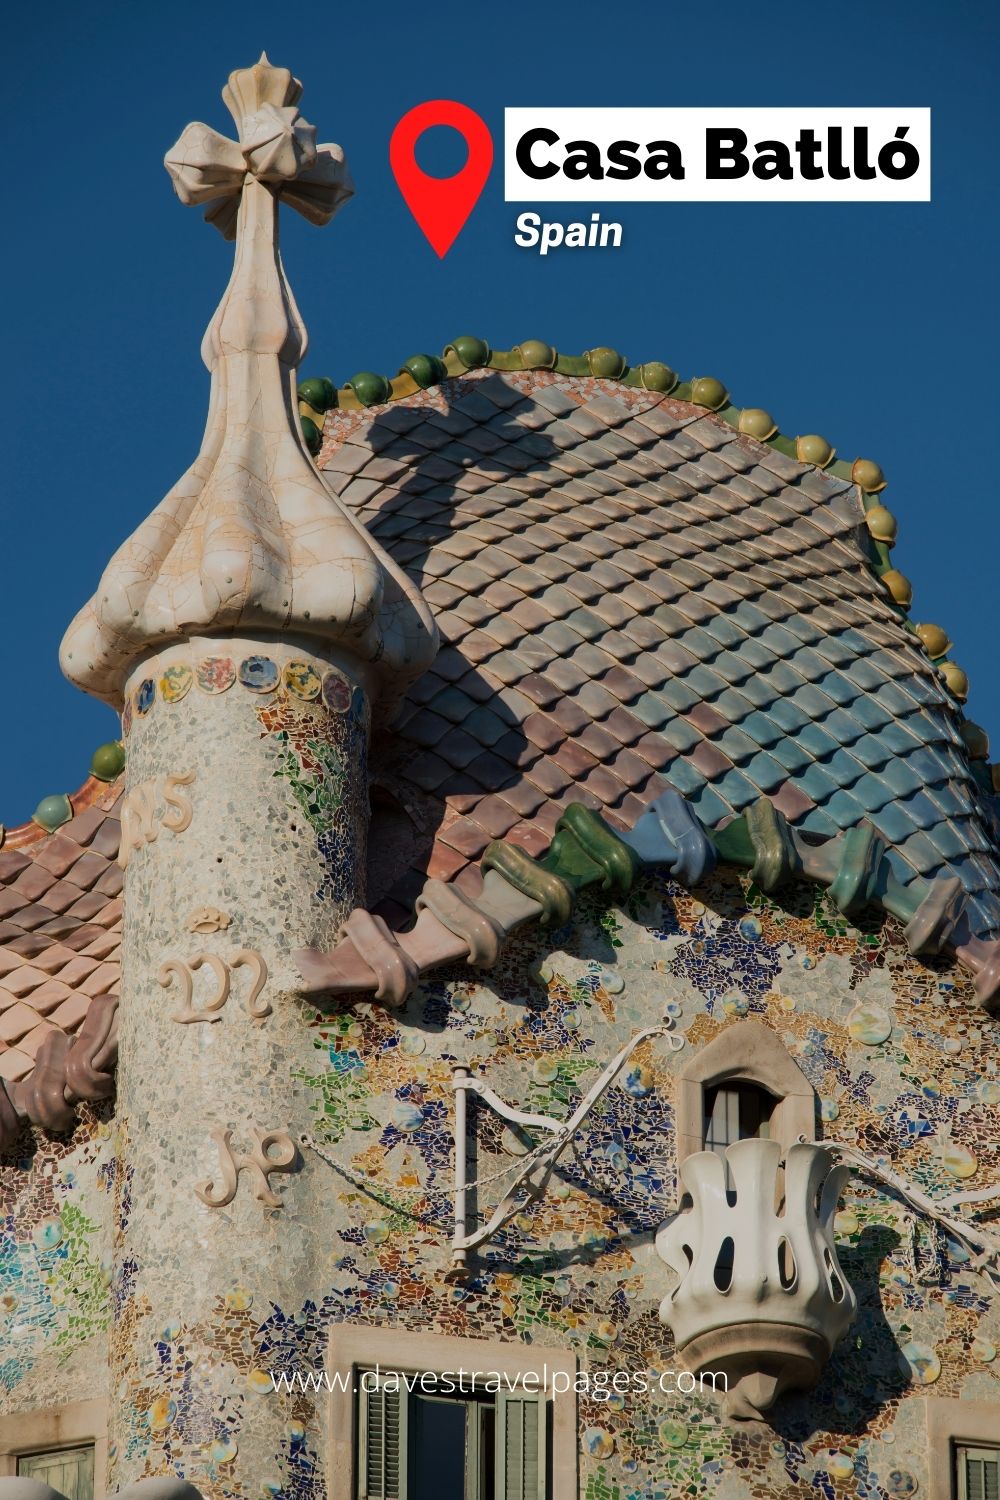 Casa Batlló - One of the most well famous European buildings